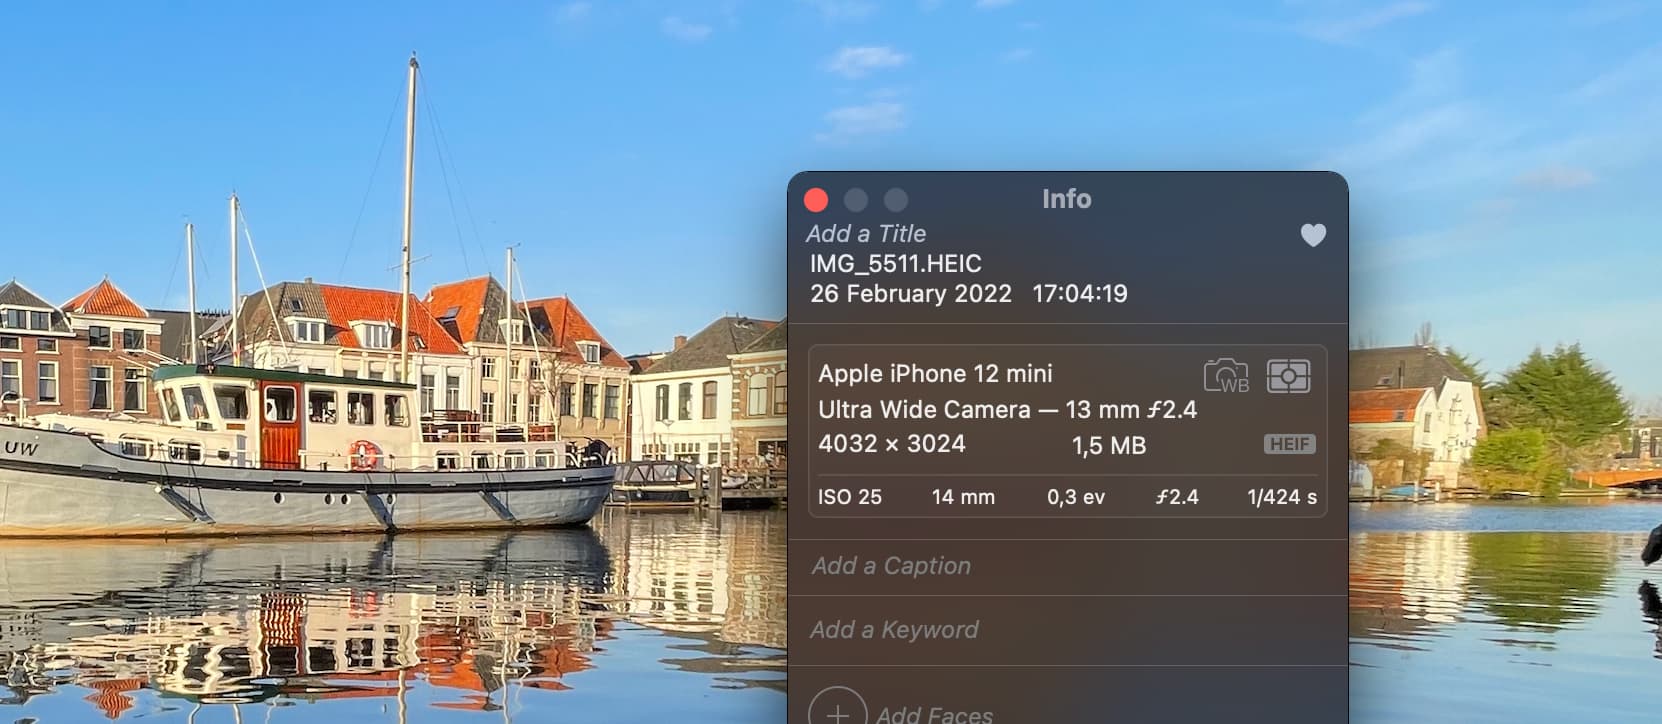 Info on image in Apple Photo showing the HEIC file extension and the HEIF format.